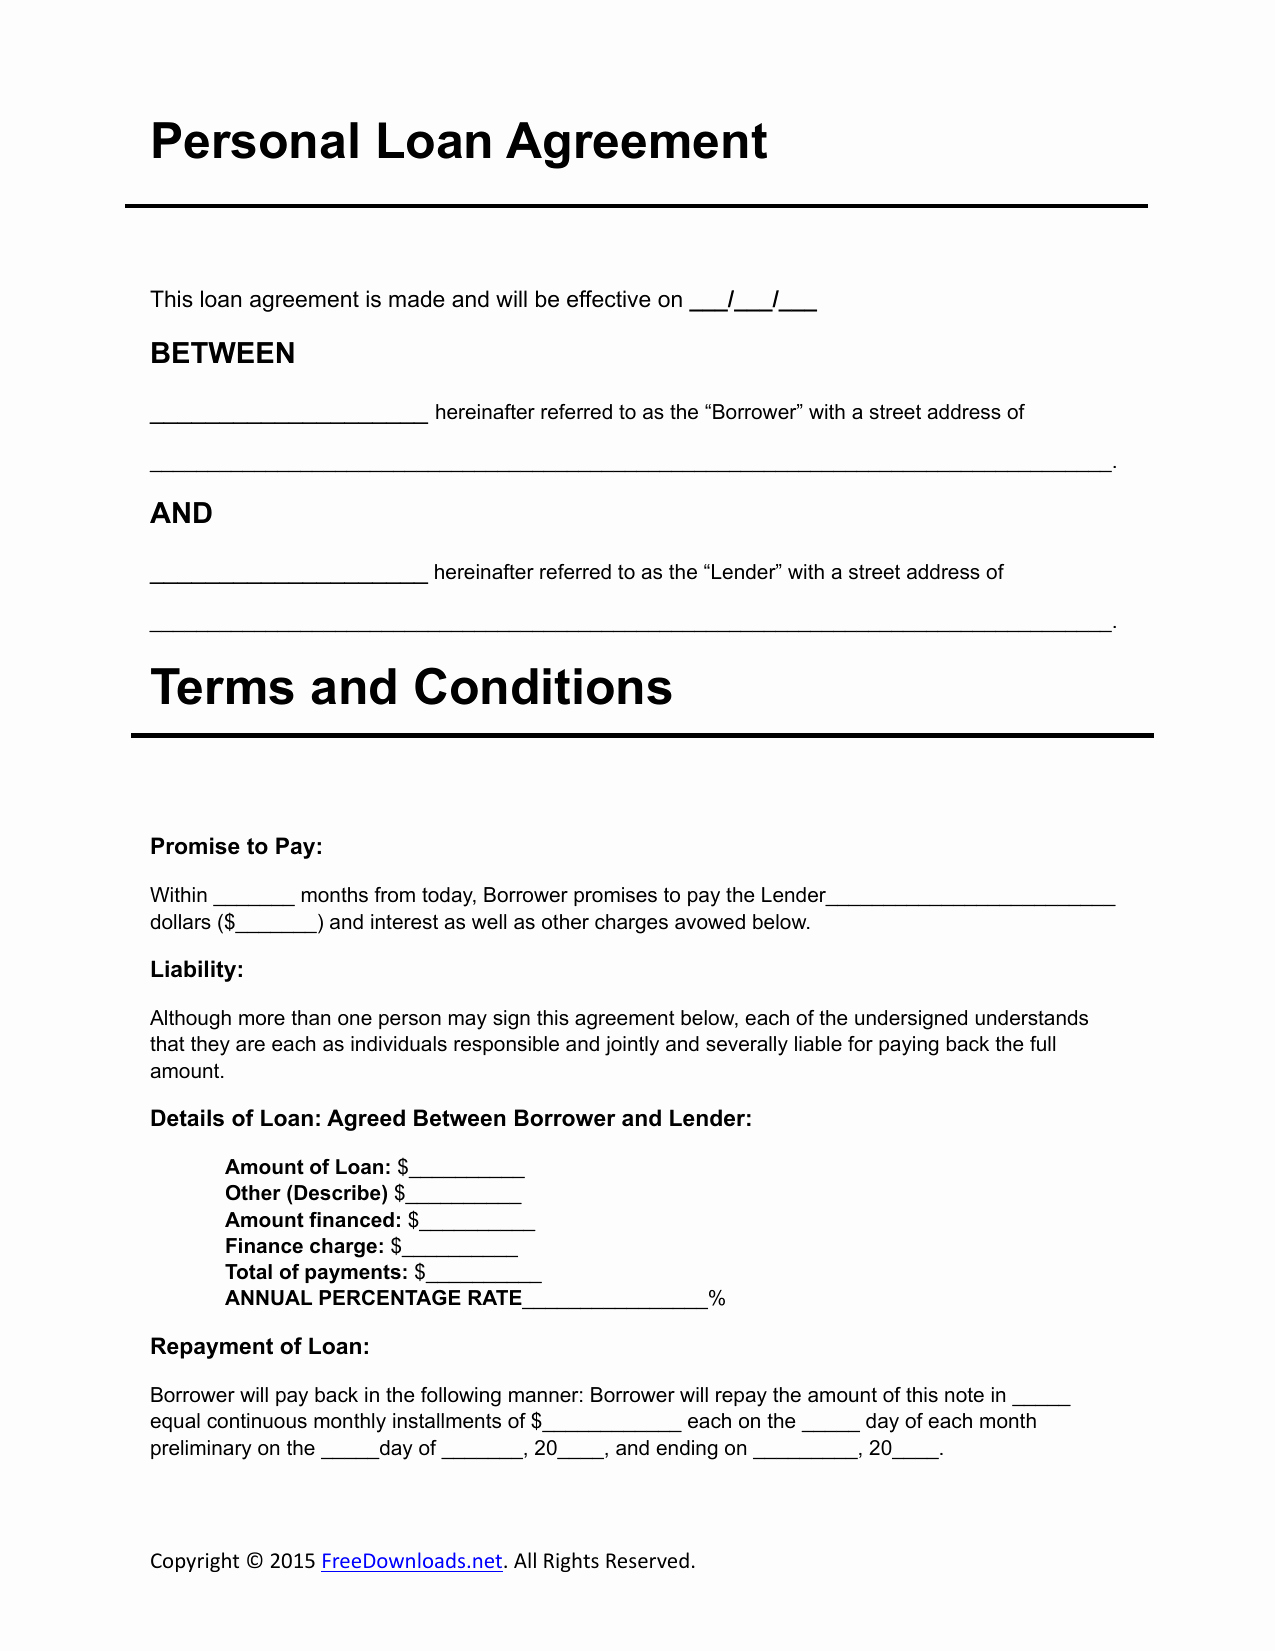 Personal Loan Document Template Best Of Download Personal Loan Agreement Template Pdf